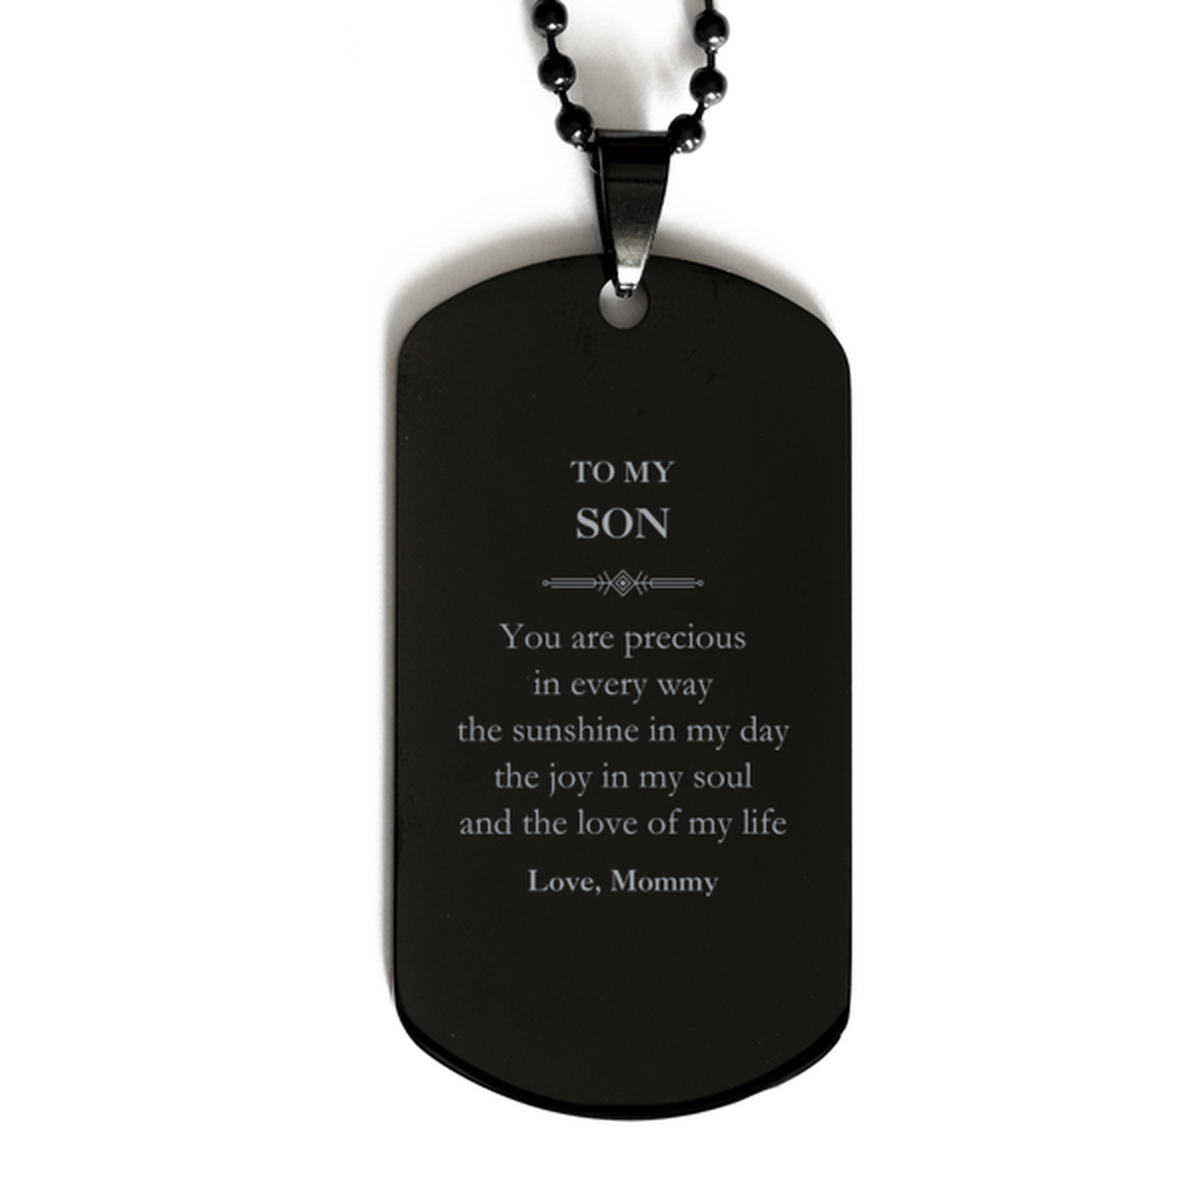 Graduation Gifts for Son Black Dog Tag Present from Mommy, Christmas Son Birthday Gifts Son You are precious in every way the sunshine in my day. Love, Mommy